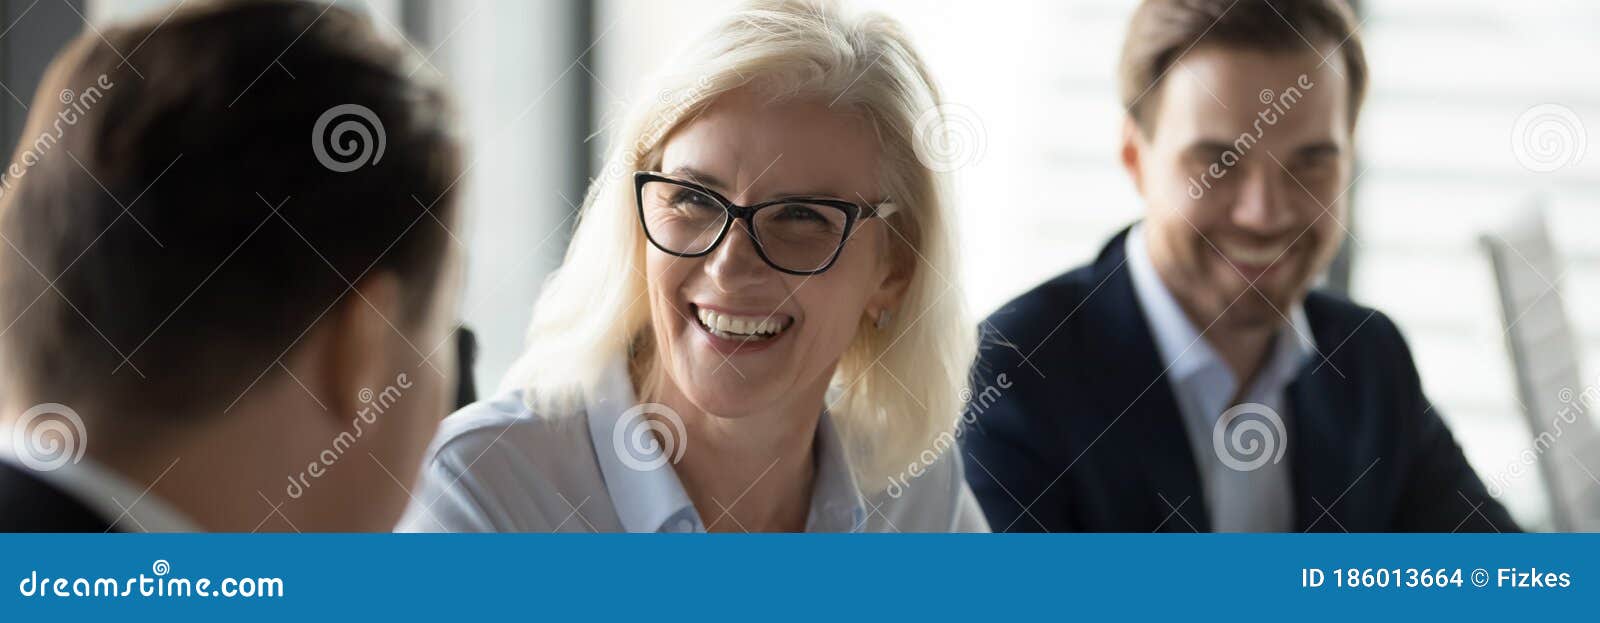 middle aged businesswoman laughing enjoy friendly talk during business meeting